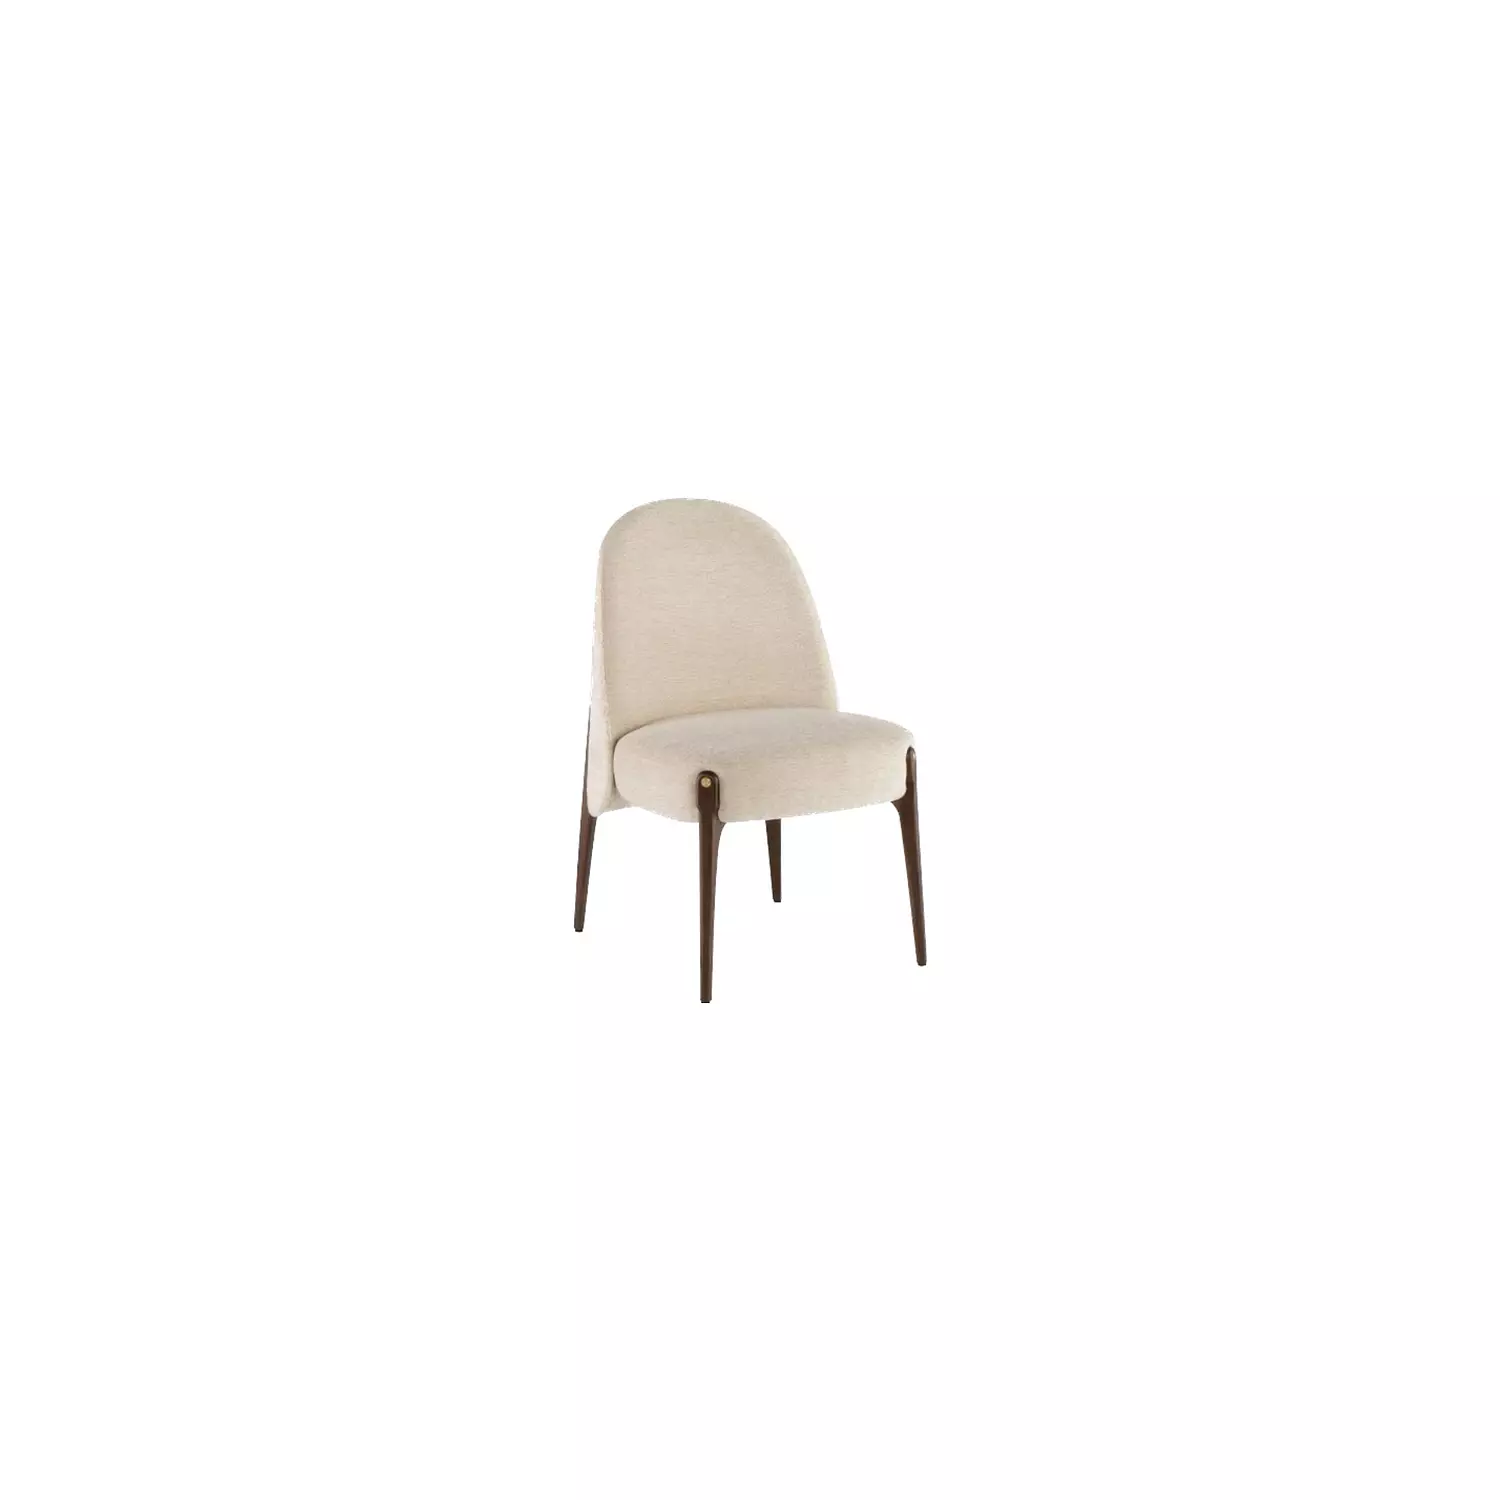 AMES CHAIR hover image